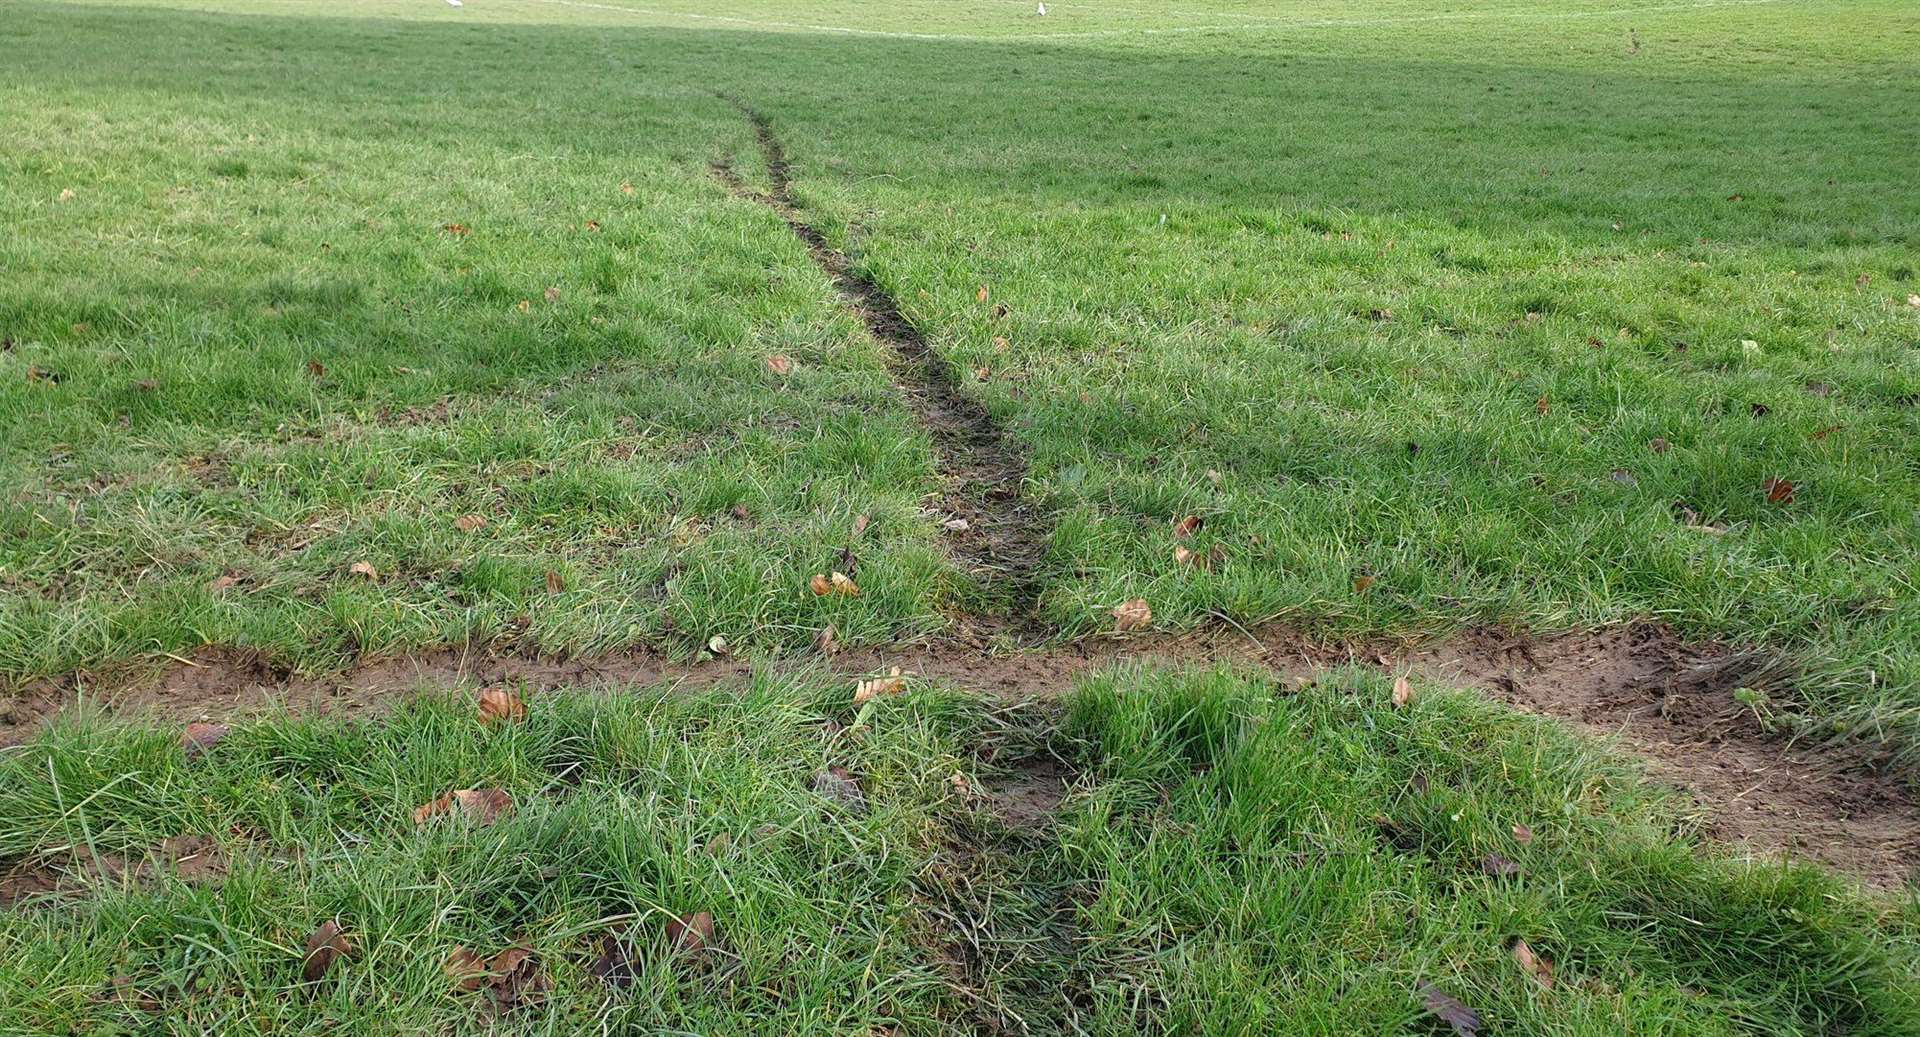 Medway Council hopes a new PSPO will help tackle nuisance motorists tearing up public places such as Barnfield Park. Photo: @BarnfieldBikes